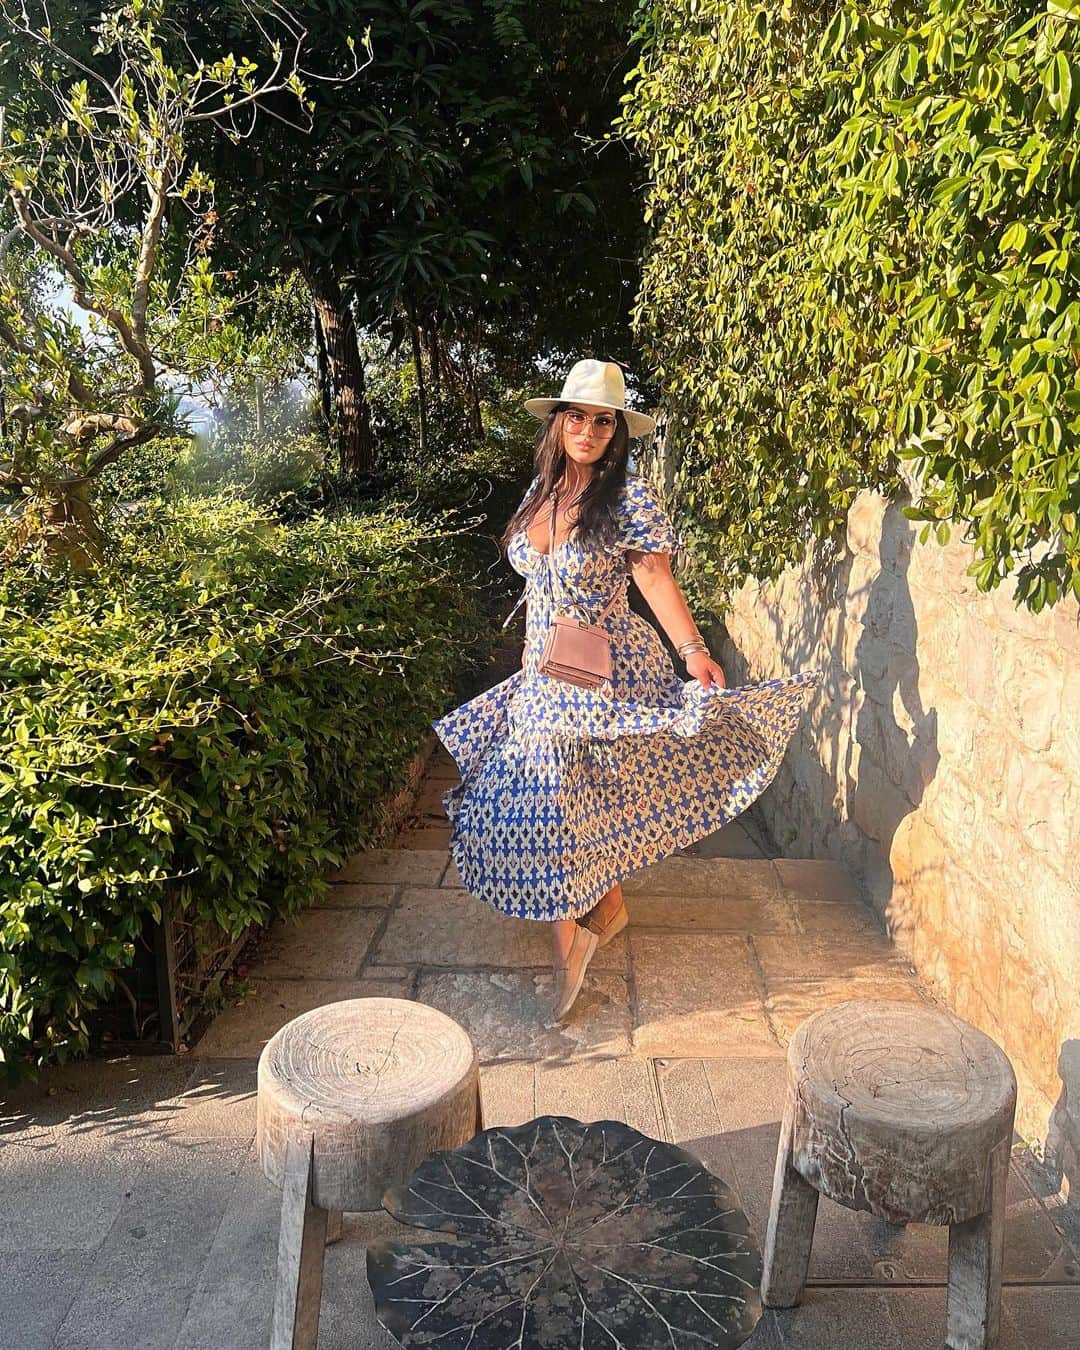 Hrush Achemyanのインスタグラム：「Exploring enchanting Lebanon, tracing my roots back to my grandmother's birthplace🇱🇧Funfact I was named after her 👵#RootsAndWanderlust #travel #lebanon」